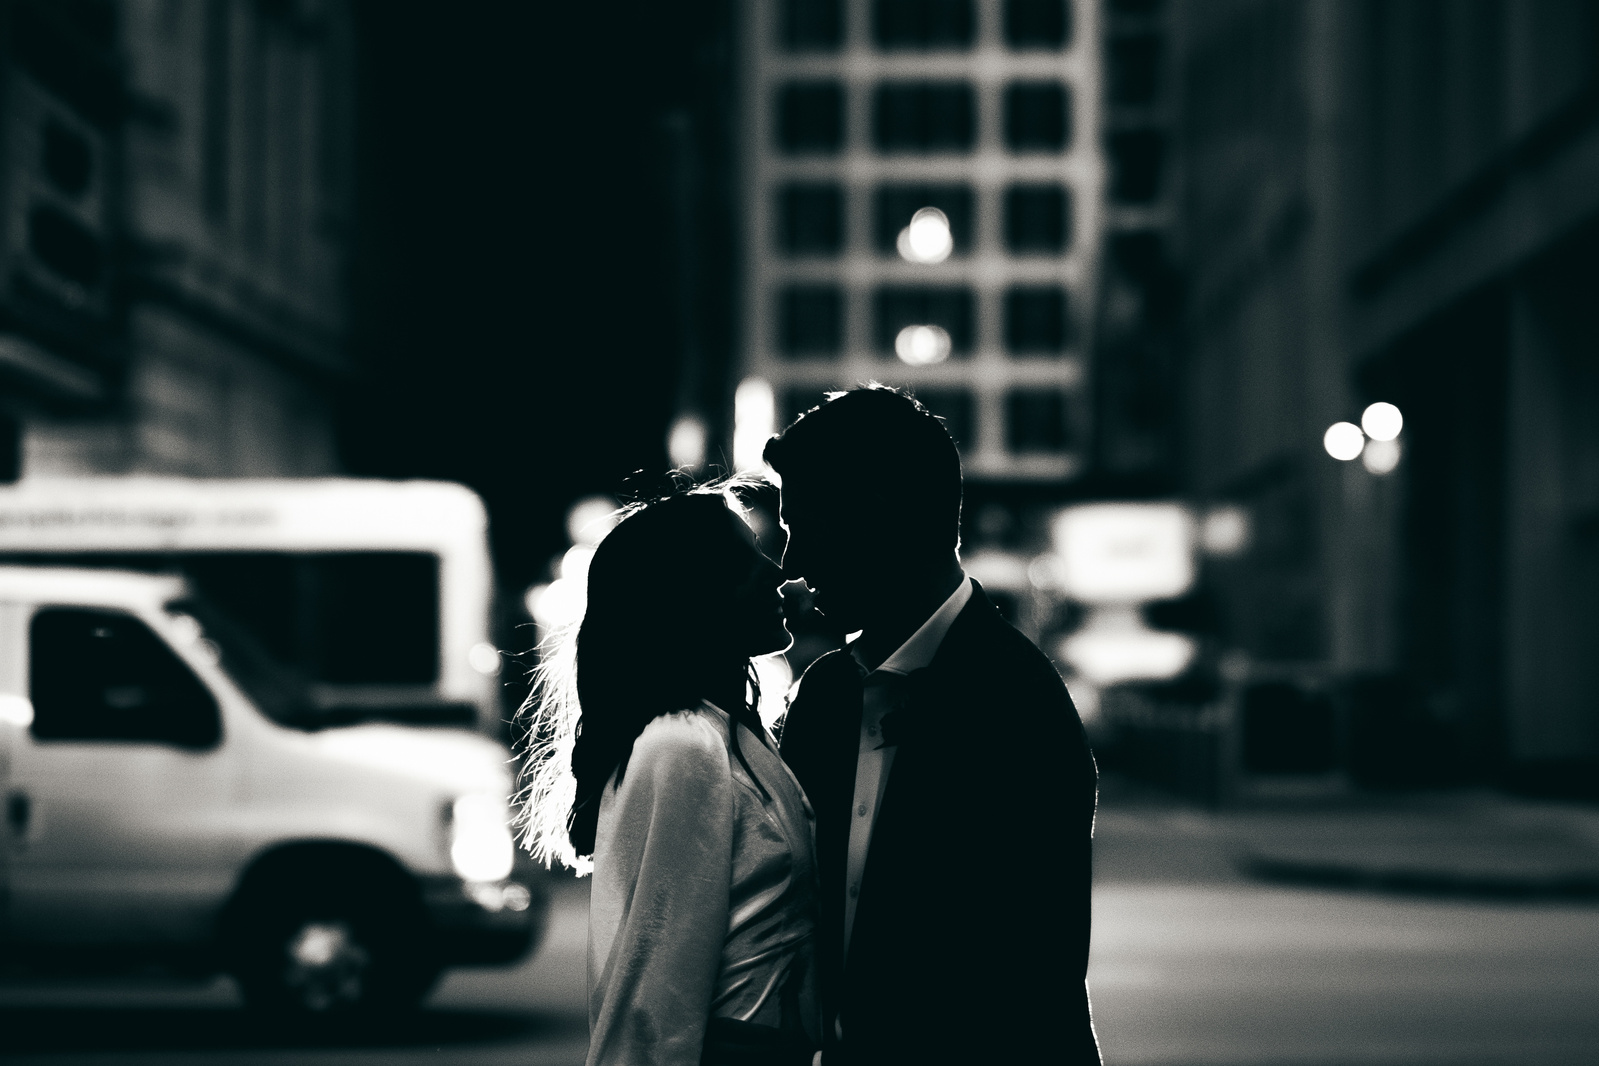 A newlywed couple kisses with city lights and passing traffic behind them after they were married in a courtroom in Chicago, Illinois.  The photo is in black and white and is a silhouette shot of the bride and groom.